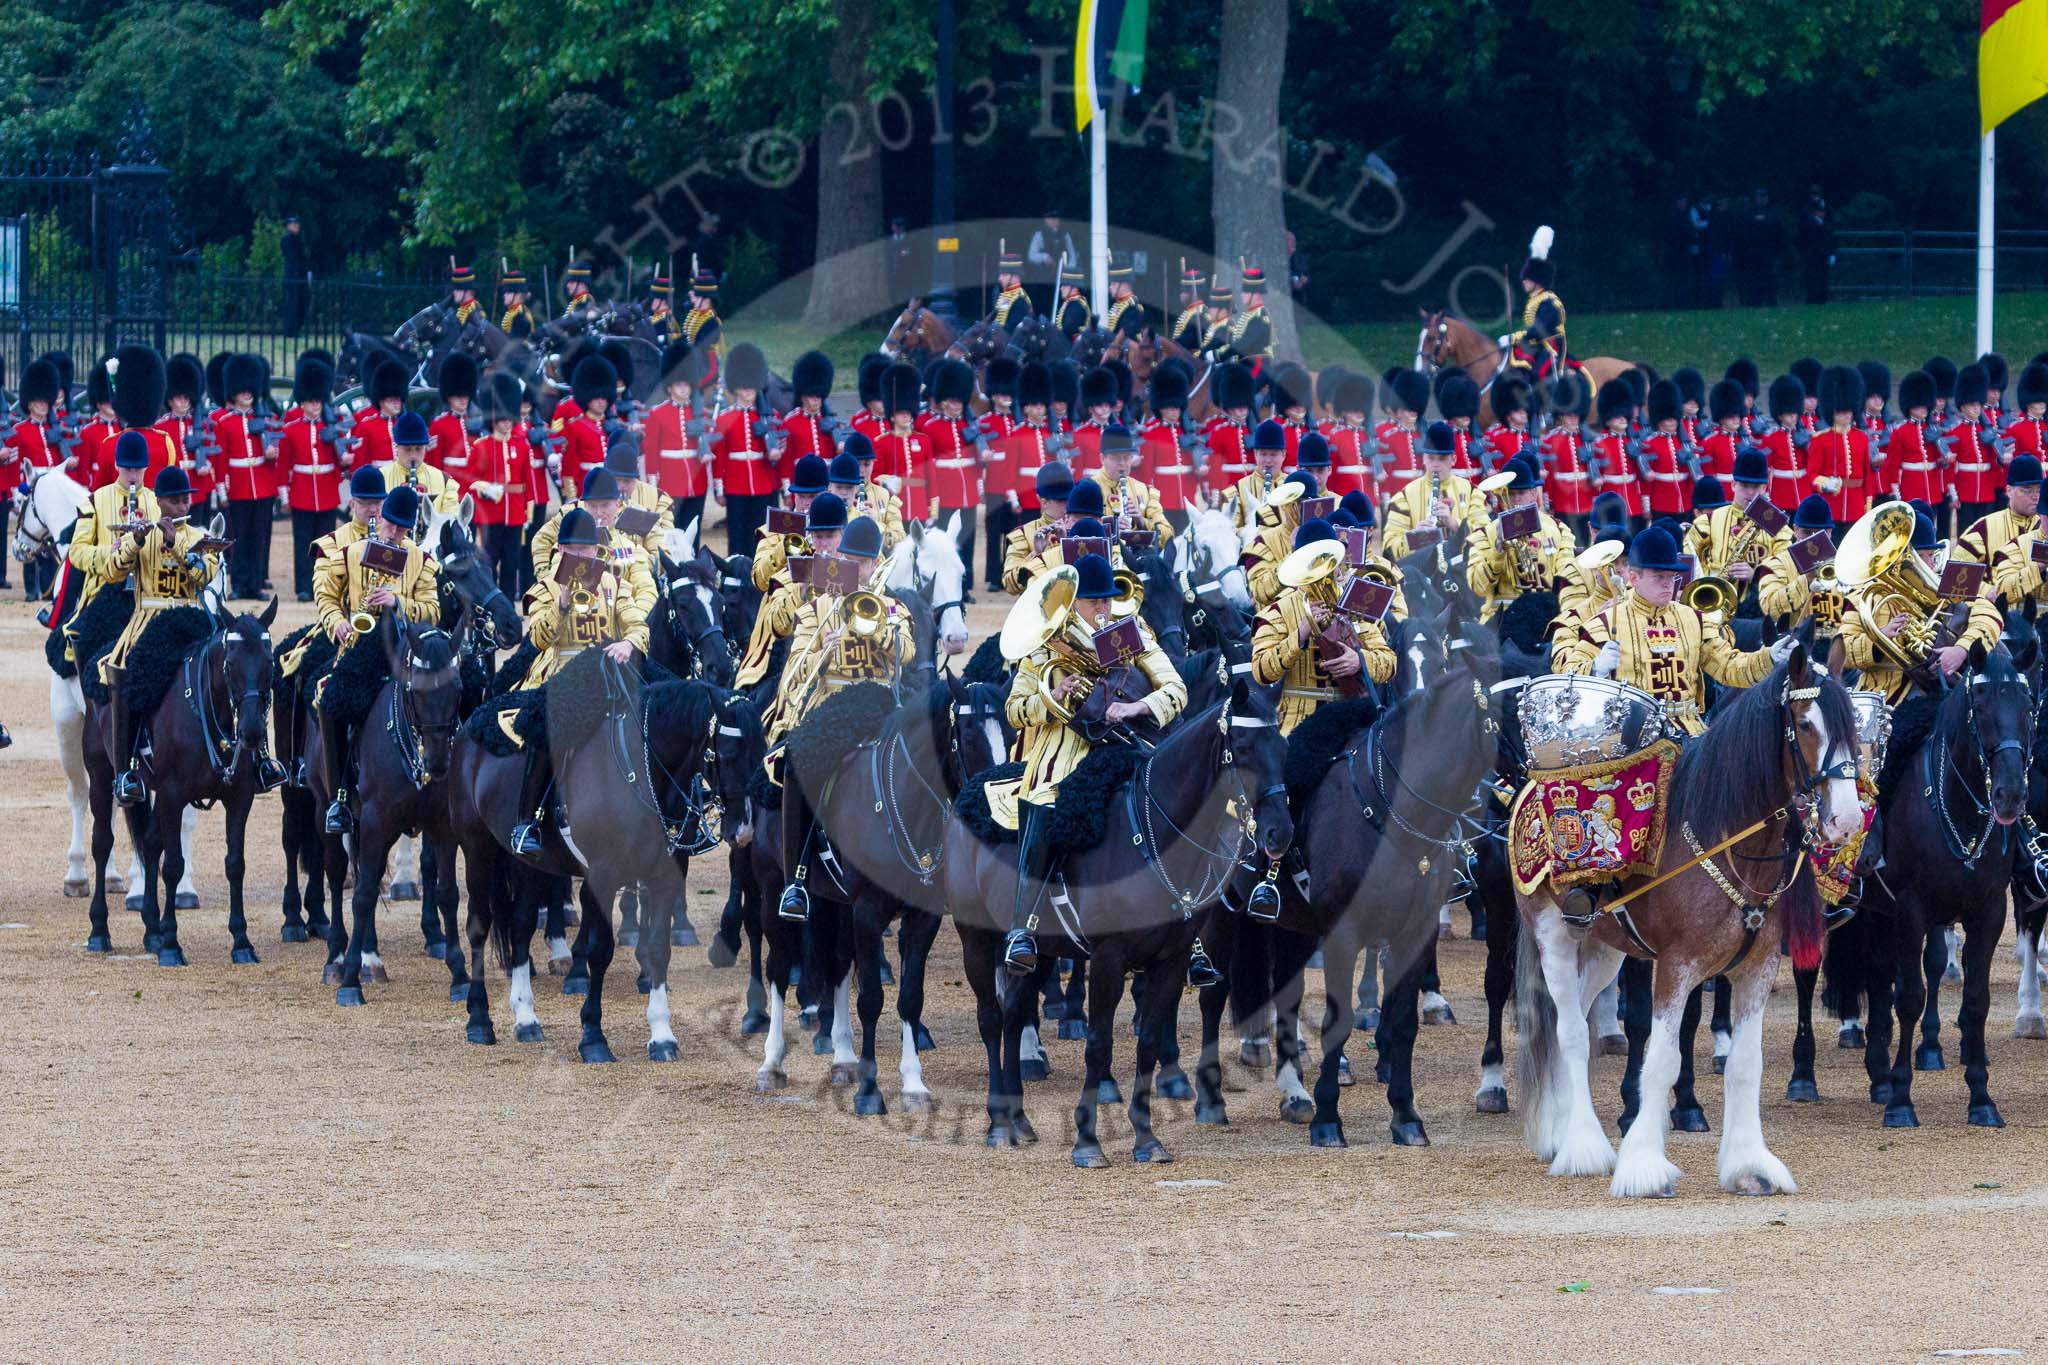 Trooping the Colour 2015. Image #574, 13 June 2015 11:56 Horse Guards Parade, London, UK